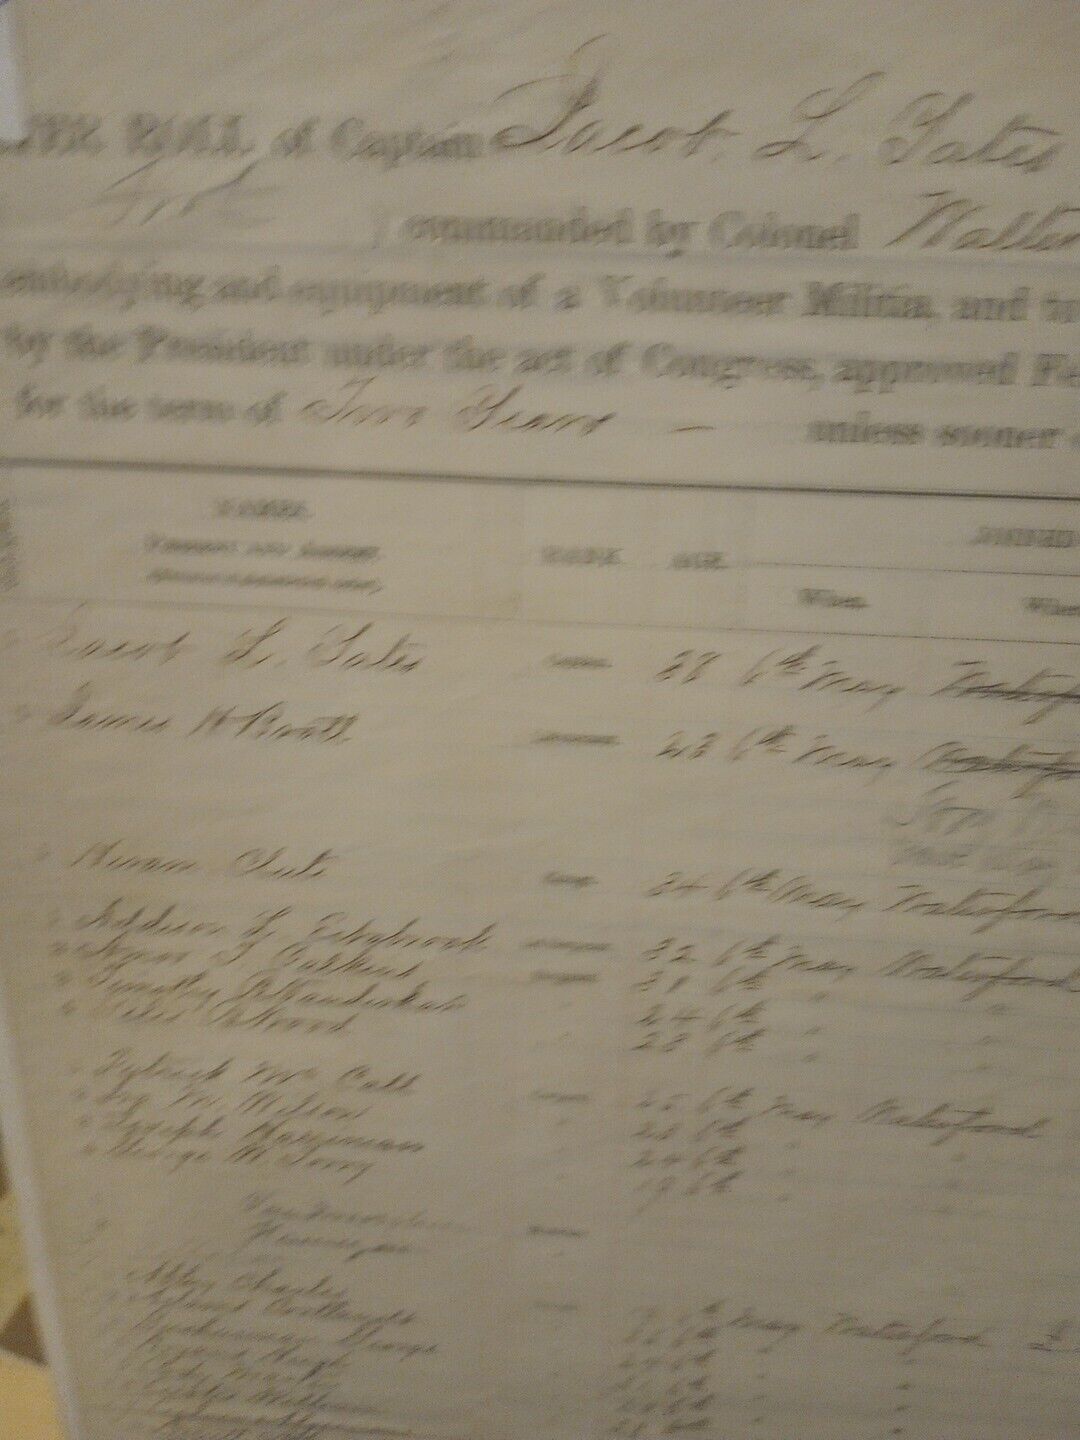 The original muster roll of The New York State Militia.May 1861.Well Preserved.